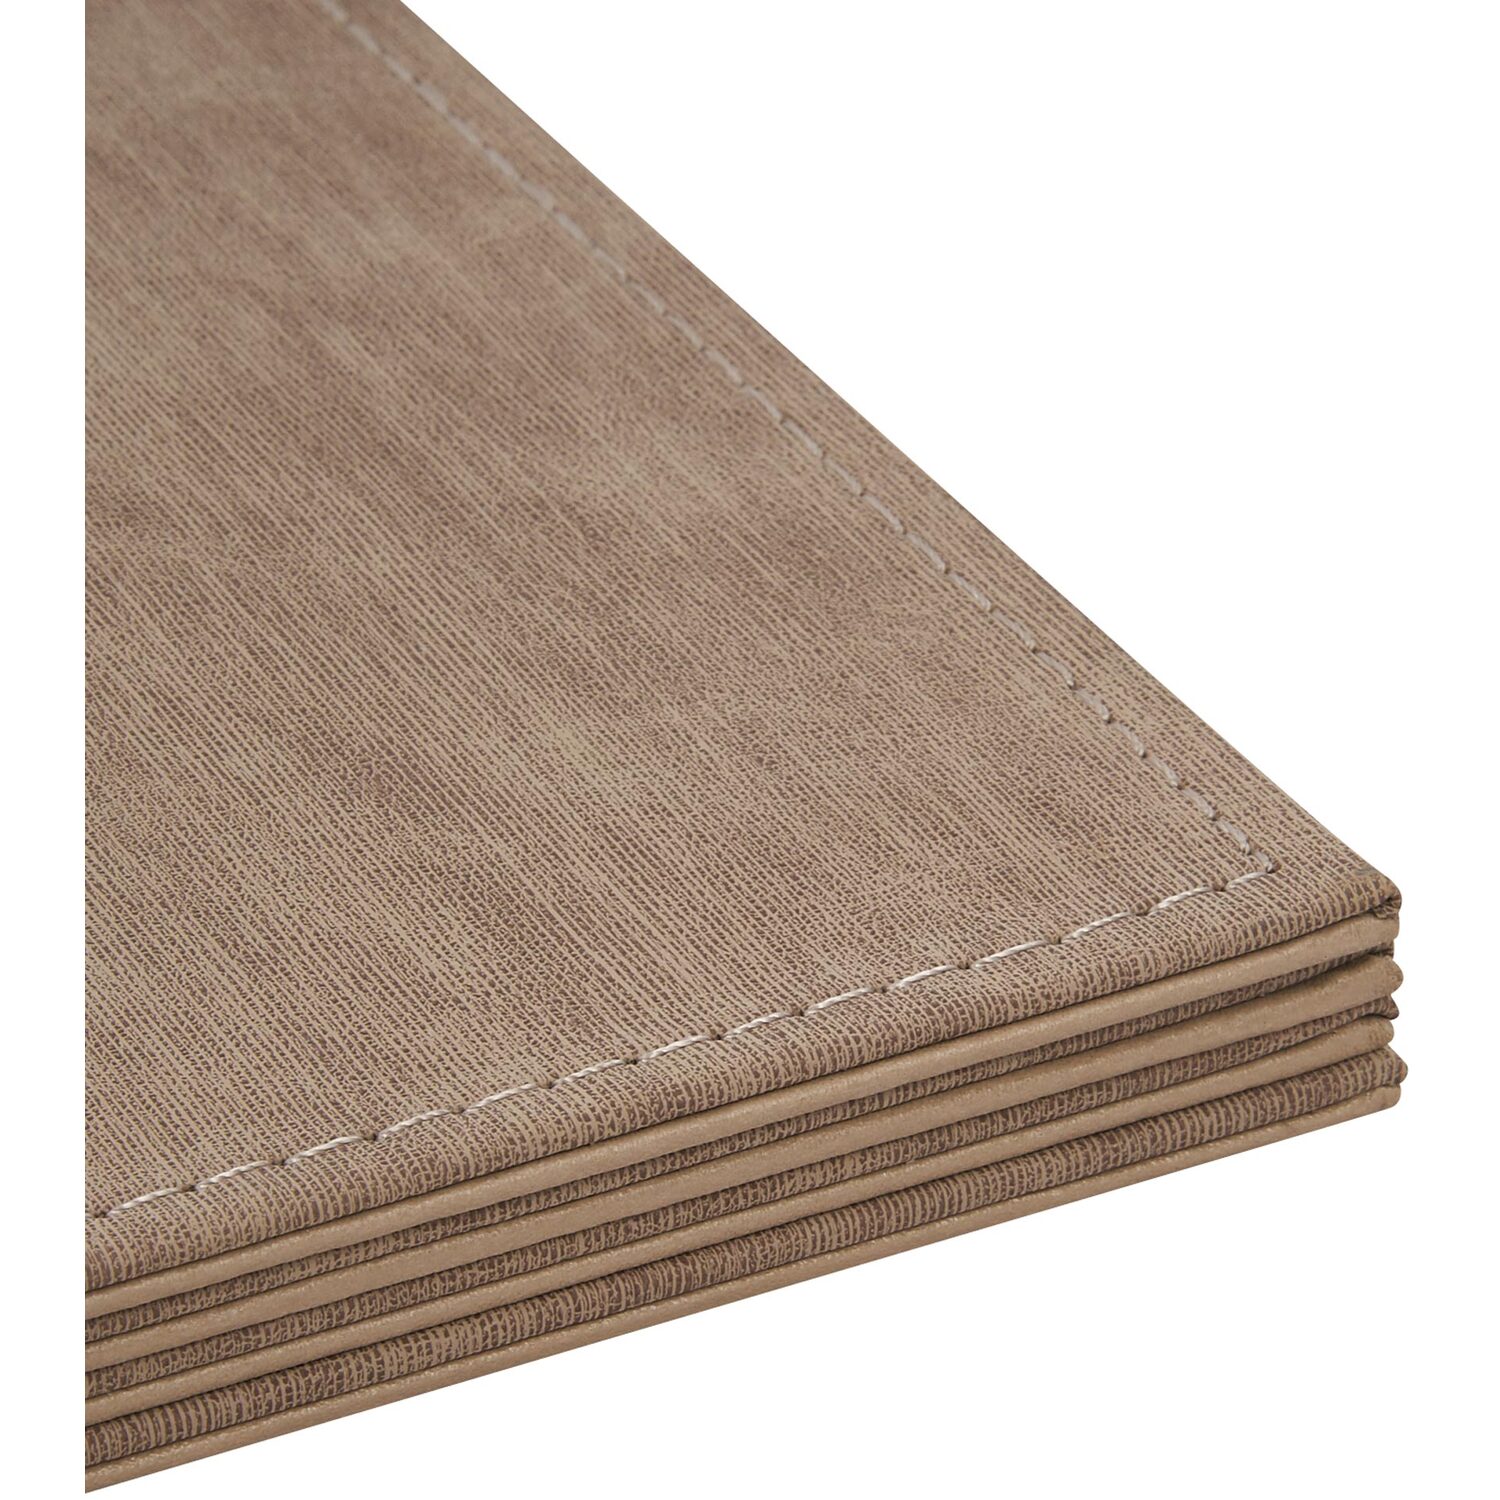 Pack of 4 Soft Touch Linen Effect Placemats - Brown Image 2